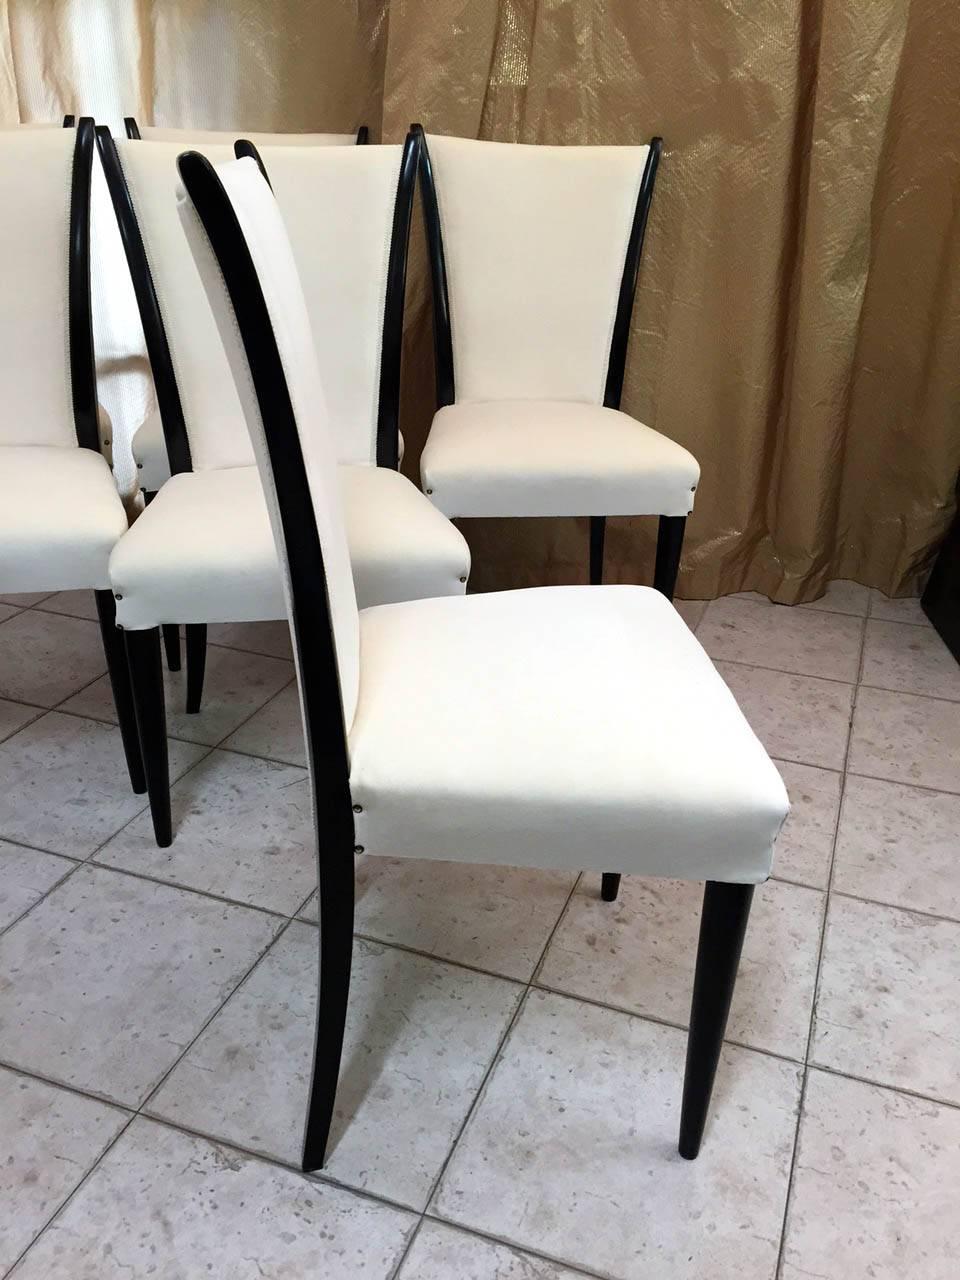 Set of six Art Deco Italian chairs produced in Italy in the 1930s.
The structure is made of black lacquered wood and the padding is in fine ivory velvet .